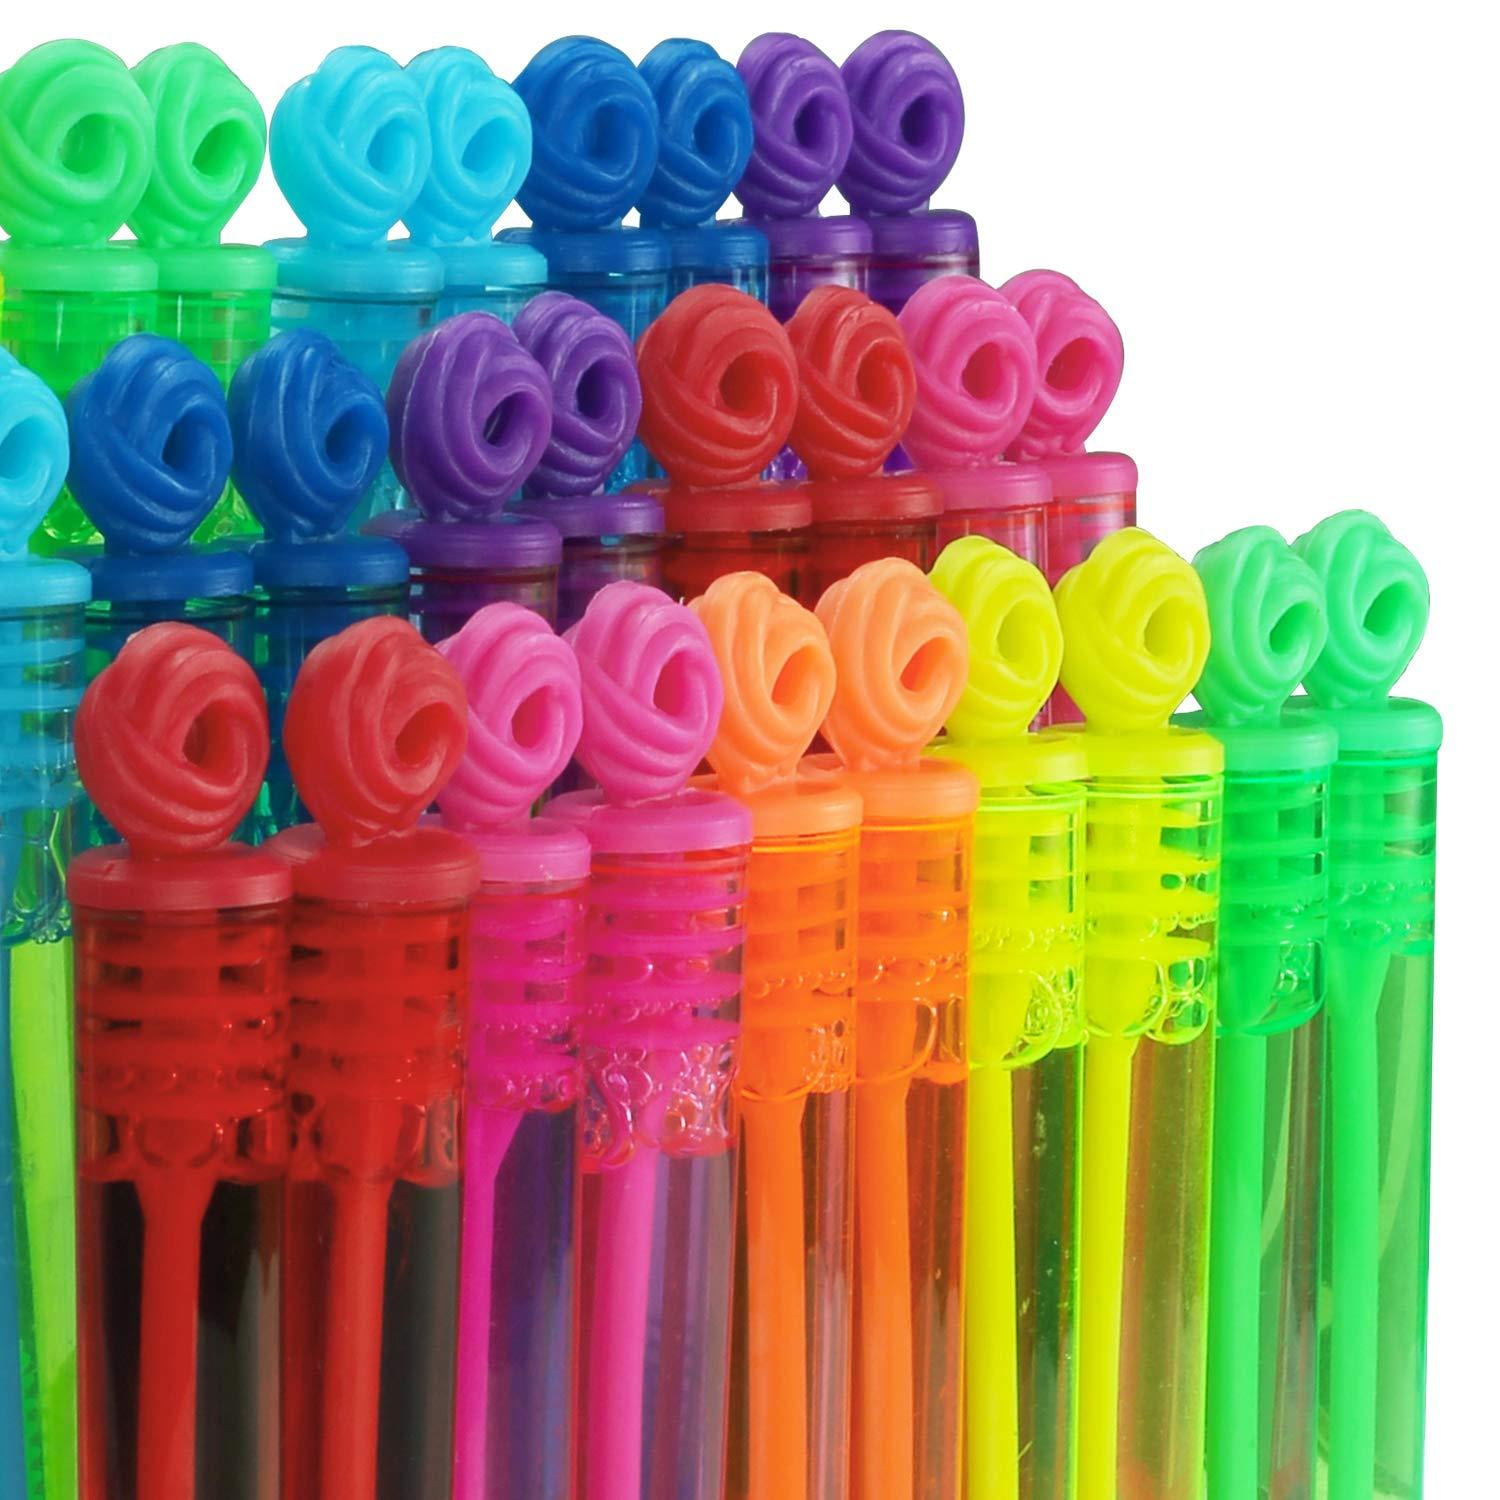 Details about   64 pcs Mini Bubble Wand Set 8 Colors Party Toy for Kids Birthday Party Gift 